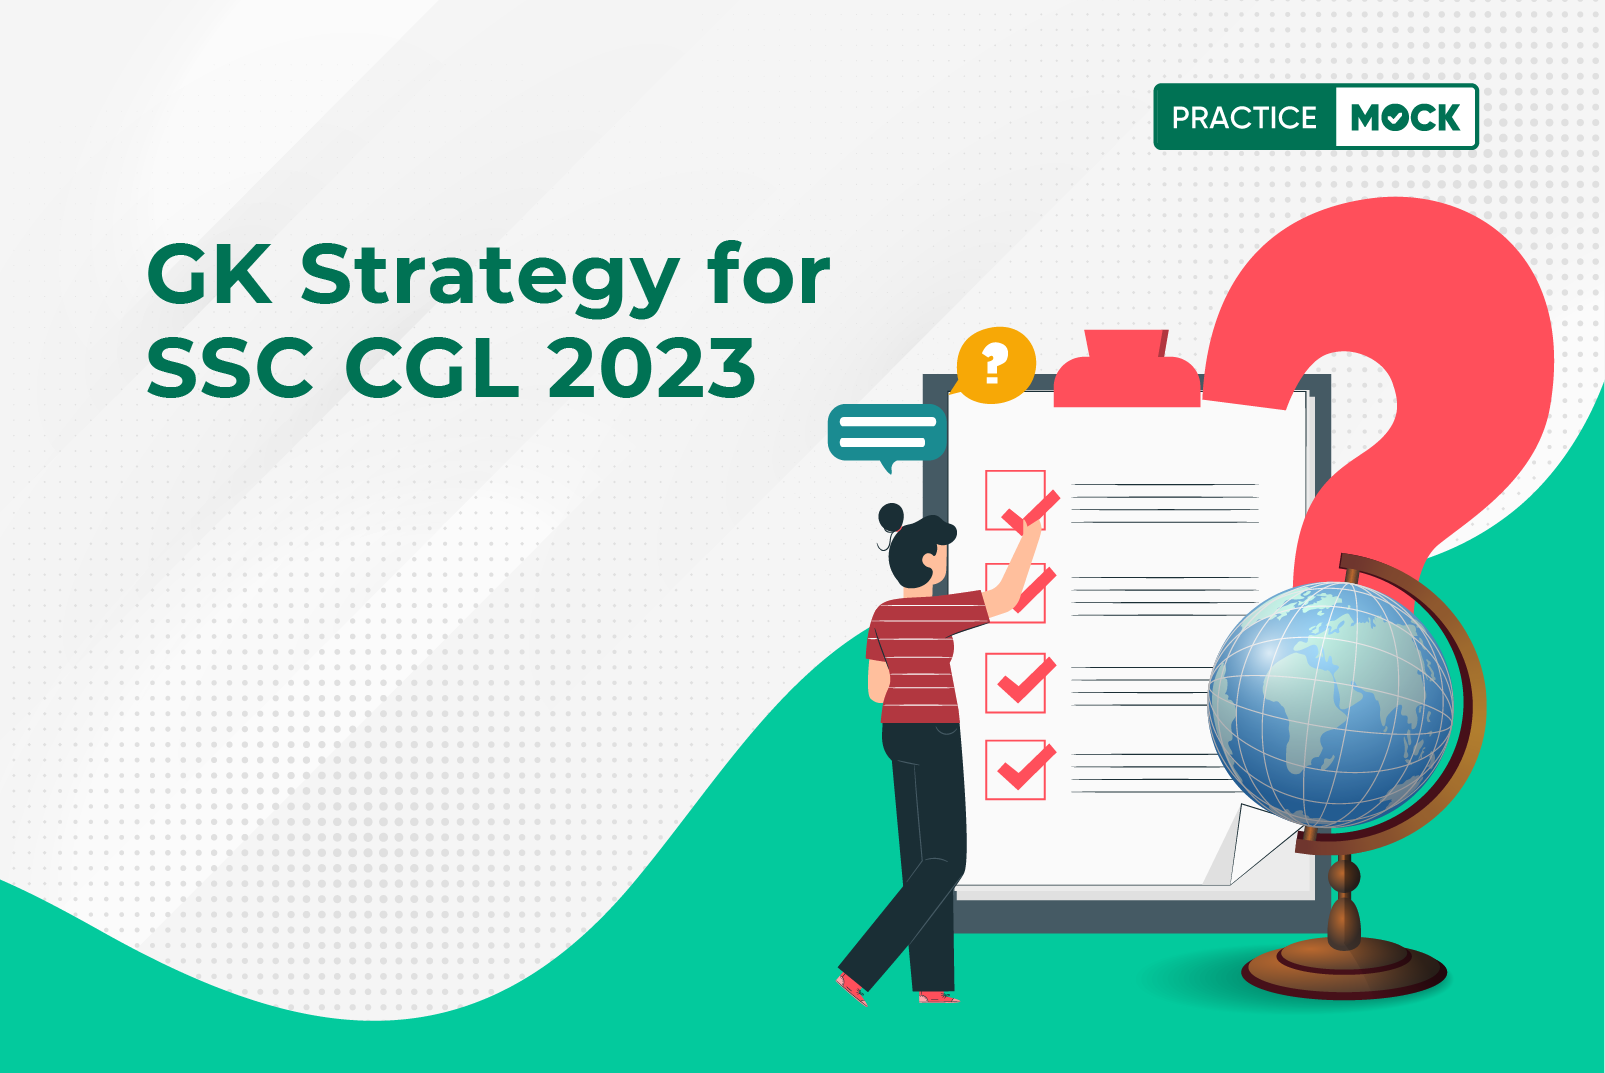 Gk Strategy for SSC CGL 2023